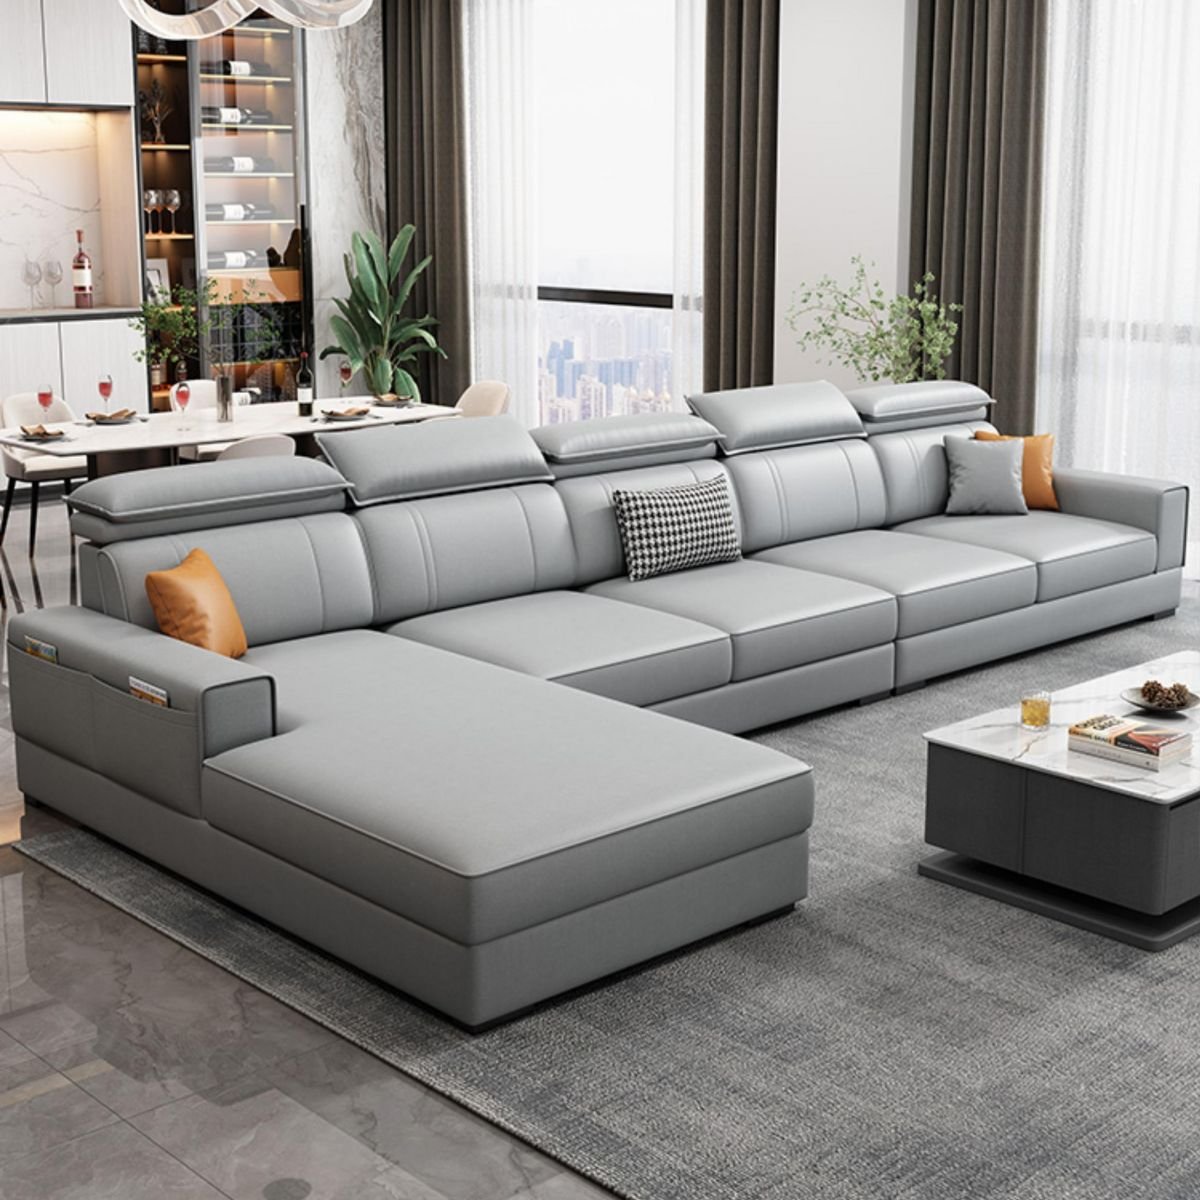 Cushion Back Water Resistant Large Over 109 Inches In Grey Tech Cloth Sectional Sofa Chaise - Left Tech Cloth 152"L x 71"W x 37"H